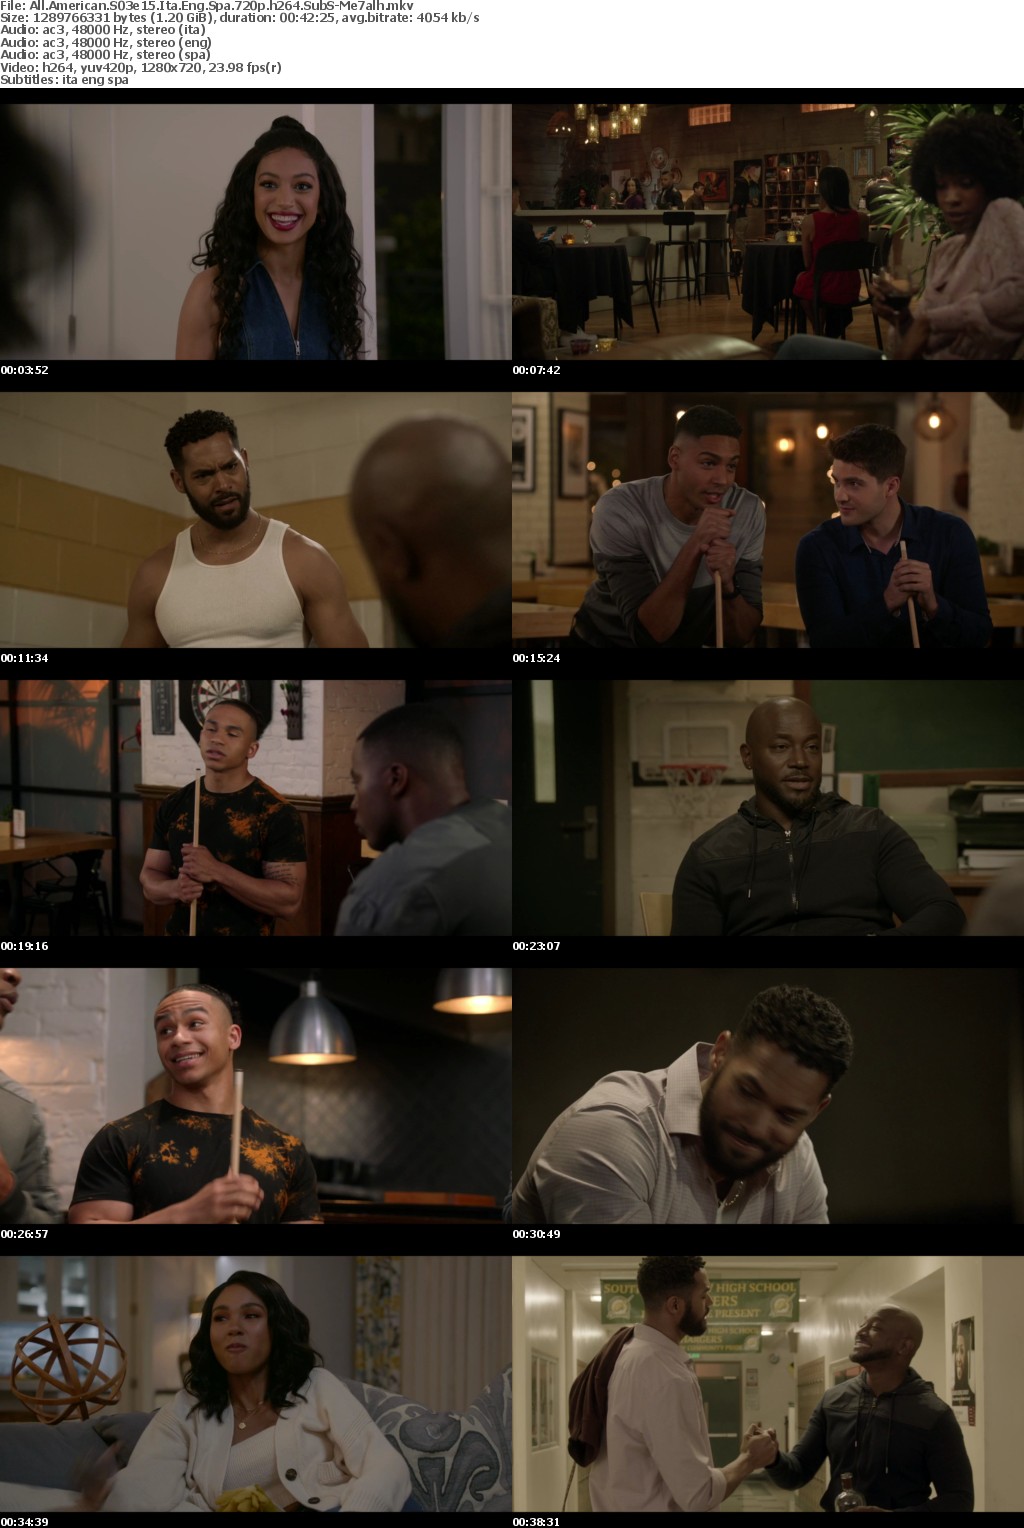 All American S03e15 720p Ita Eng Spa SubS MirCrewRelease byMe7alh